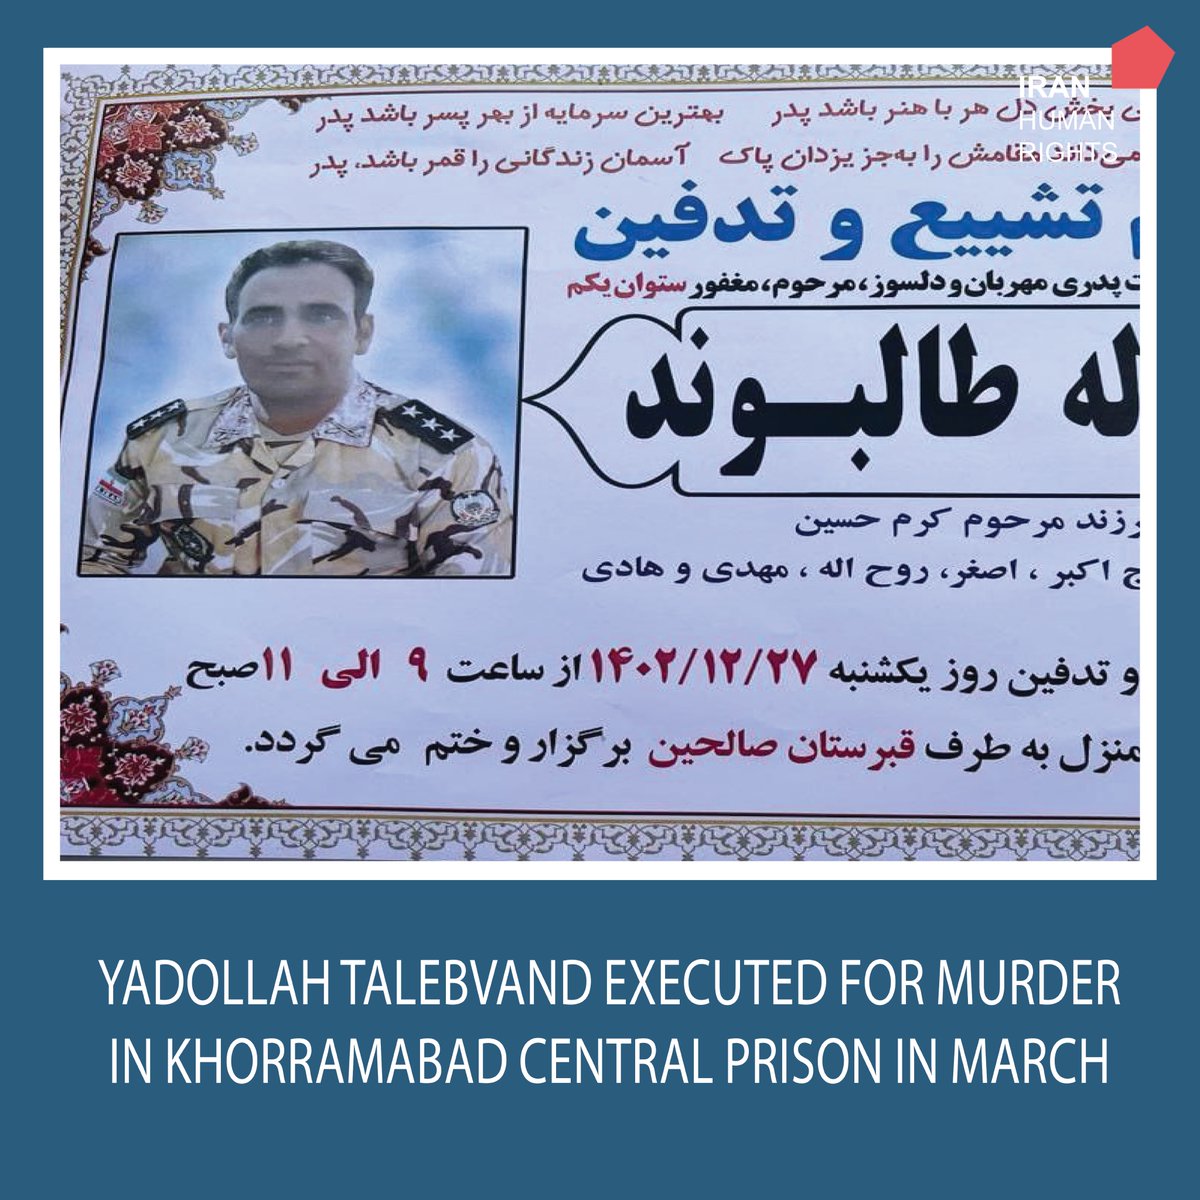 #Iran: Yadollah Talebvand, a 43-year-old army officer sentenced to qisas (retribution-in-kind) for murder, was executed in Khorramabad Central Prison on 17 March. 

#StopExecutionsInIran
#NoDeathPenalty 
iranhr.net/en/articles/66…